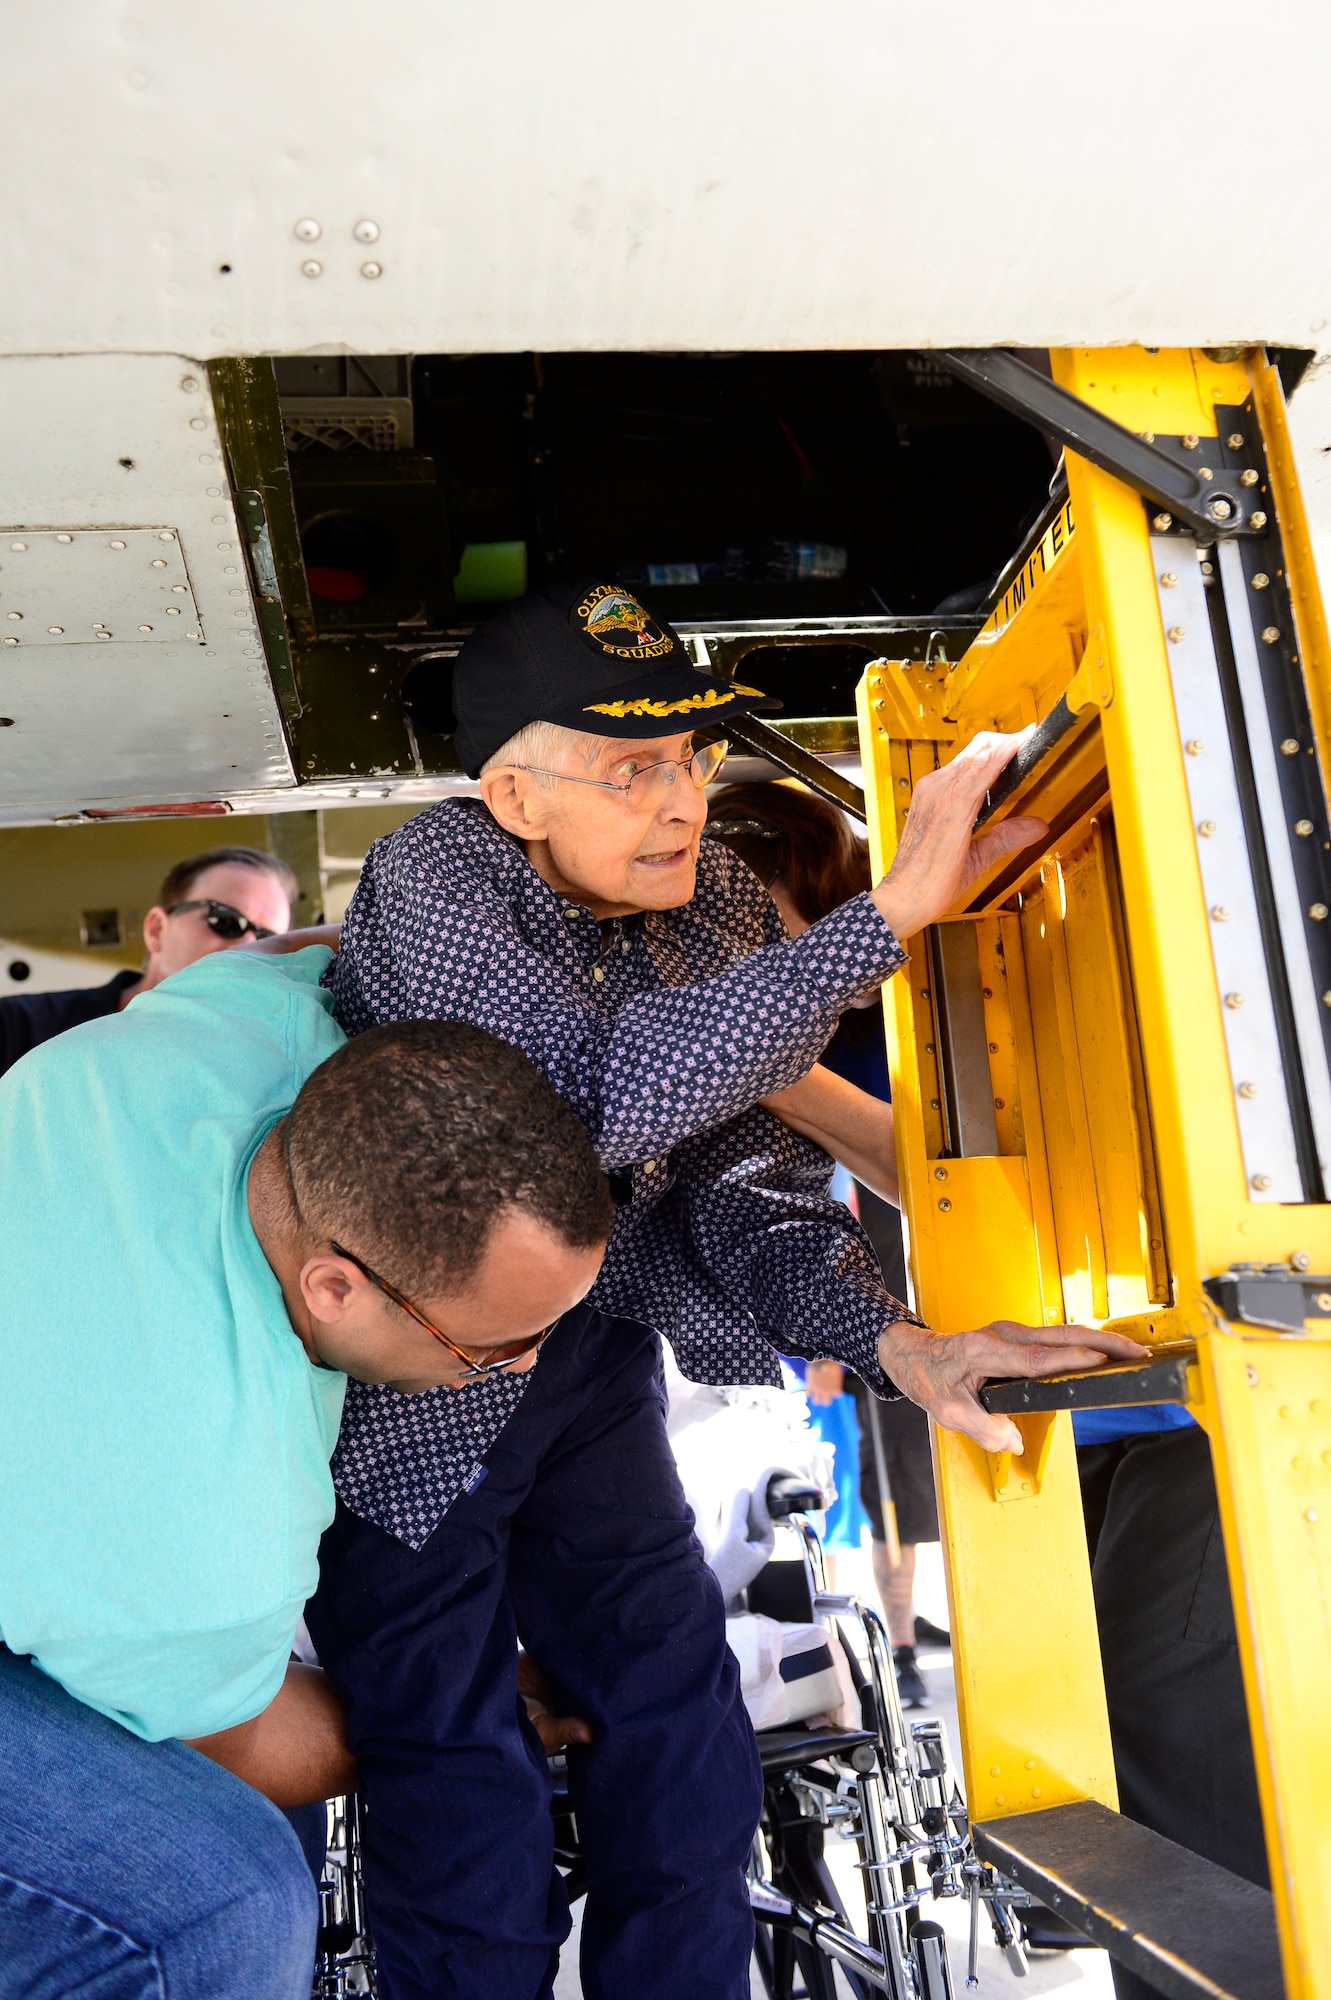 Donald Nesbit, a World War II veteran, is assisted into a B-25 bomber June 22, 2018, at Hill Air Force Base, Utah. The bomber was on display for the Warriors Over the Wasatch Air and Space Show. (U.S. Air Force photo by David Perry)